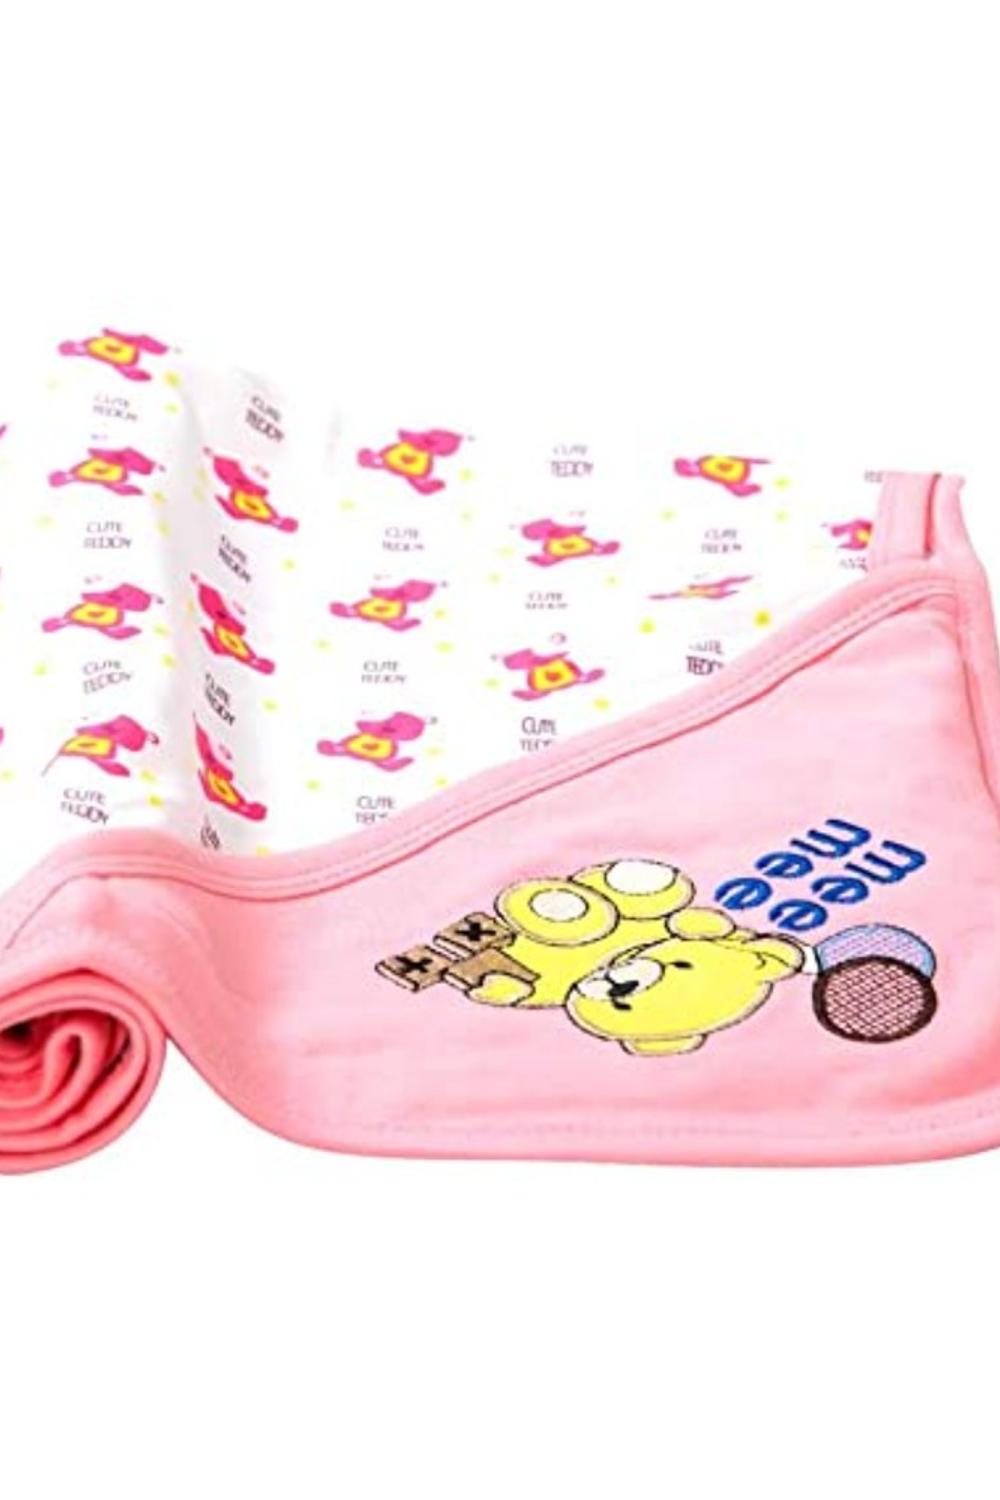 Mee Mee Baby Warm and Soft Swaddle Wrapper with Hood Single Layer for New born 0 to 6 months (Pink)